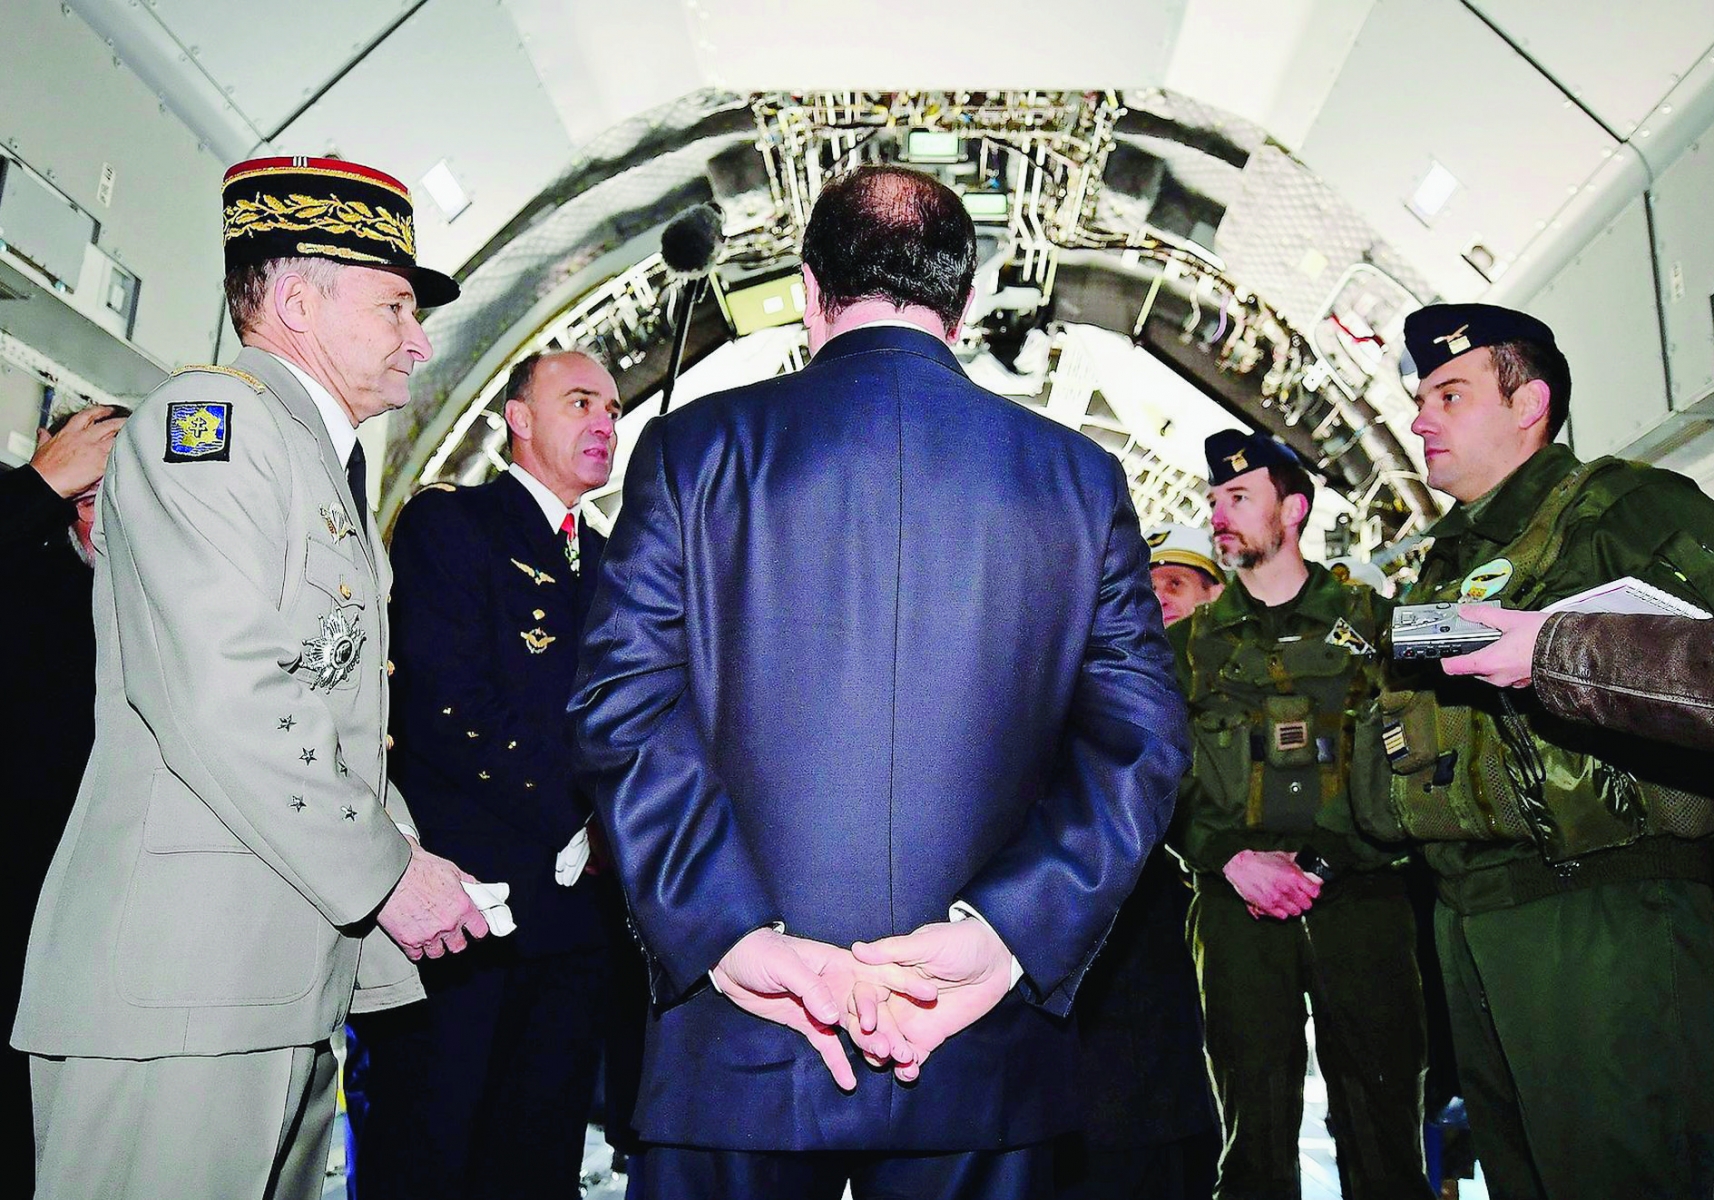 French President Francois Hollande, back to the camera, speaks to soldiers in an Airbus A400M as he visits the military airbase 118, in Mont-de-Marsan, southwestern France, where he gave his New Year address to the army, Friday Jan. 6, 2017. (Caroline Blumberg, Pool via AP) FRANCE HOLLANDE